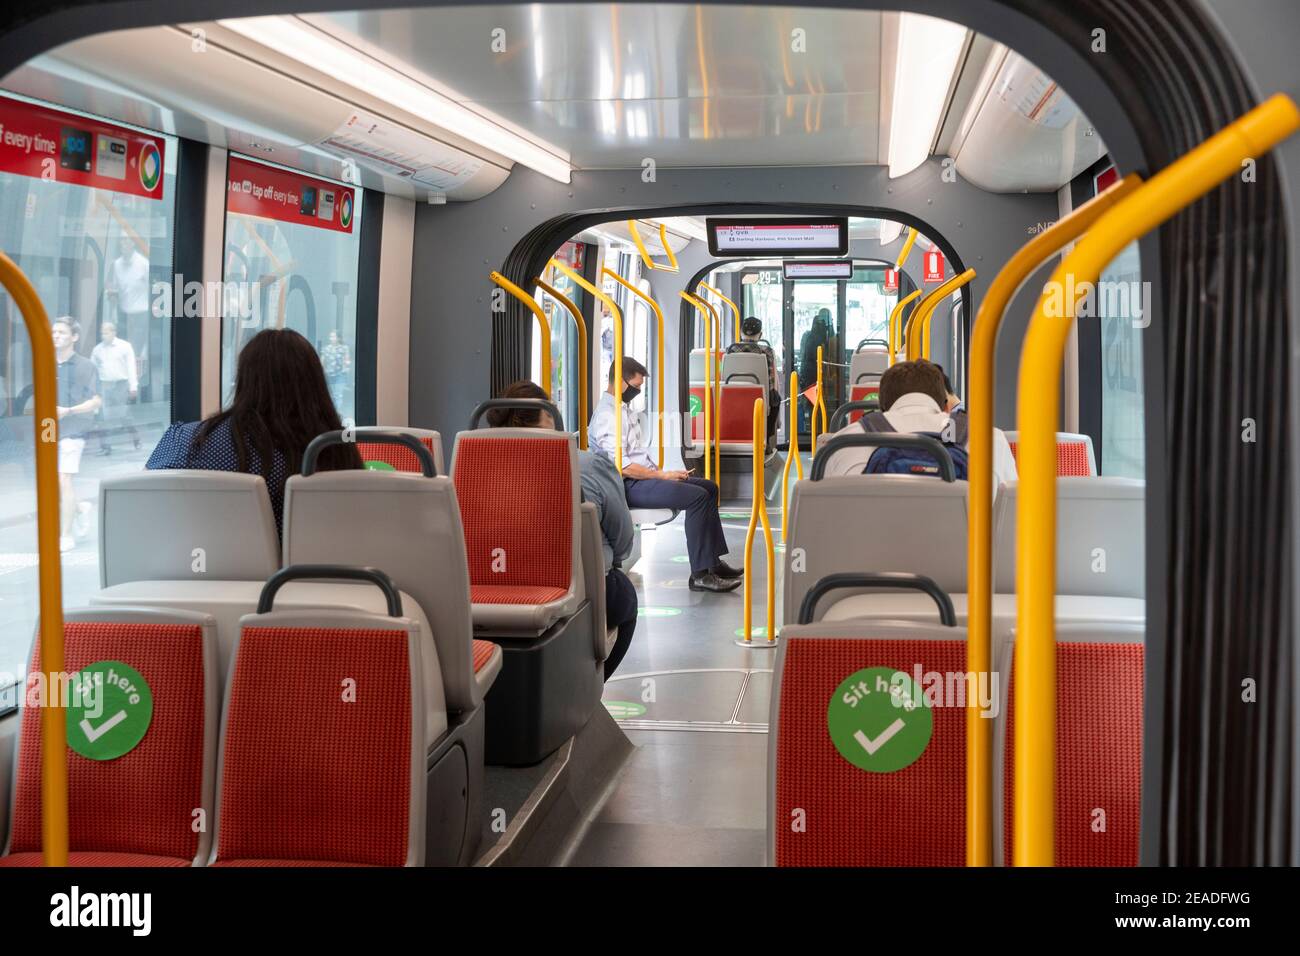 Sydney light rail train carriage interior, passengers commuting, sit here stickers act as social distancing during covid 19 pandemic,Sydney,Australia Stock Photo